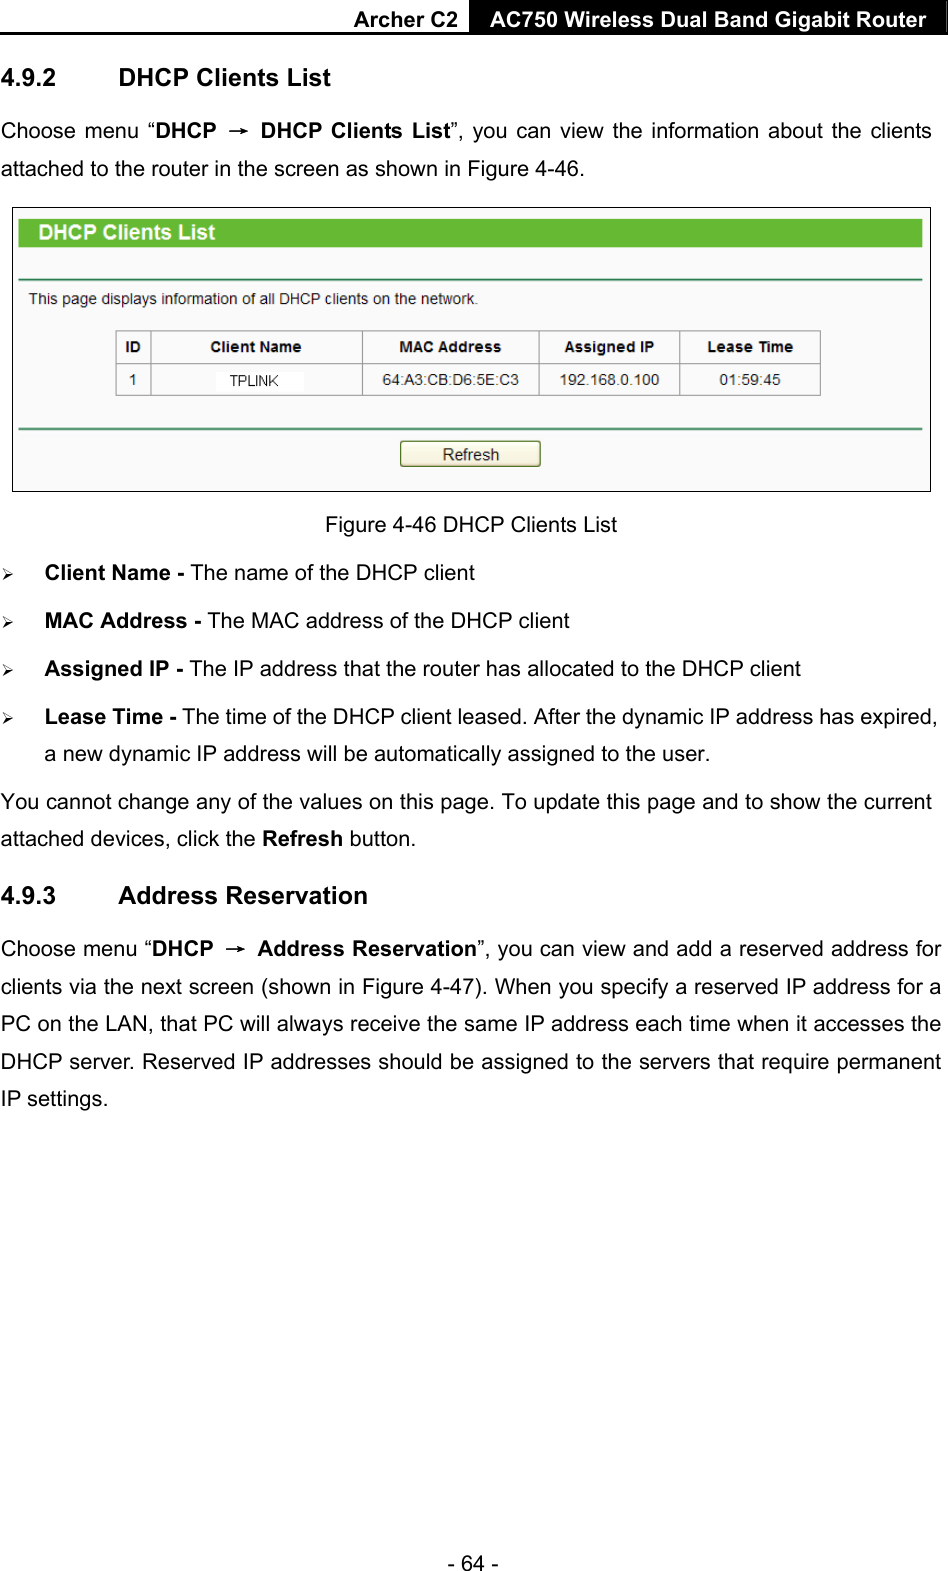 Archer C2 AC750 Wireless Dual Band Gigabit Router  - 64 - 4.9.2  DHCP Clients List Choose menu “DHCP  →  DHCP Clients List”, you can view the information about the clients attached to the router in the screen as shown in Figure 4-46.  Figure 4-46 DHCP Clients List  Client Name - The name of the DHCP client    MAC Address - The MAC address of the DHCP client    Assigned IP - The IP address that the router has allocated to the DHCP client  Lease Time - The time of the DHCP client leased. After the dynamic IP address has expired, a new dynamic IP address will be automatically assigned to the user.     You cannot change any of the values on this page. To update this page and to show the current attached devices, click the Refresh button. 4.9.3  Address Reservation Choose menu “DHCP  → Address Reservation”, you can view and add a reserved address for clients via the next screen (shown in Figure 4-47). When you specify a reserved IP address for a PC on the LAN, that PC will always receive the same IP address each time when it accesses the DHCP server. Reserved IP addresses should be assigned to the servers that require permanent IP settings.   